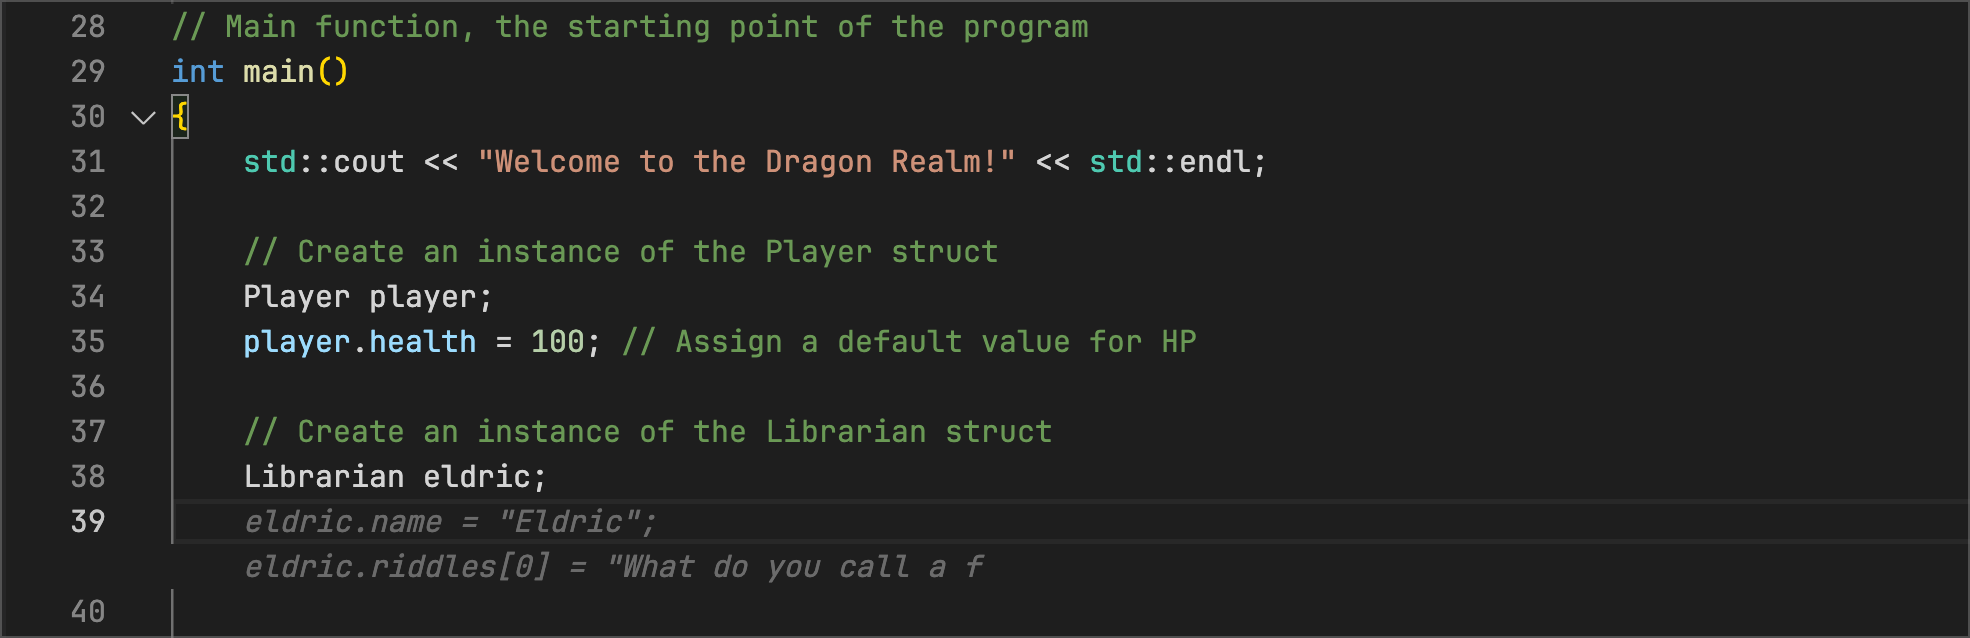 adventure.cpp - Code Suggestions instantiates a Librarian object, gives it the name Eldric, and starts to suggest riddles for the riddle array